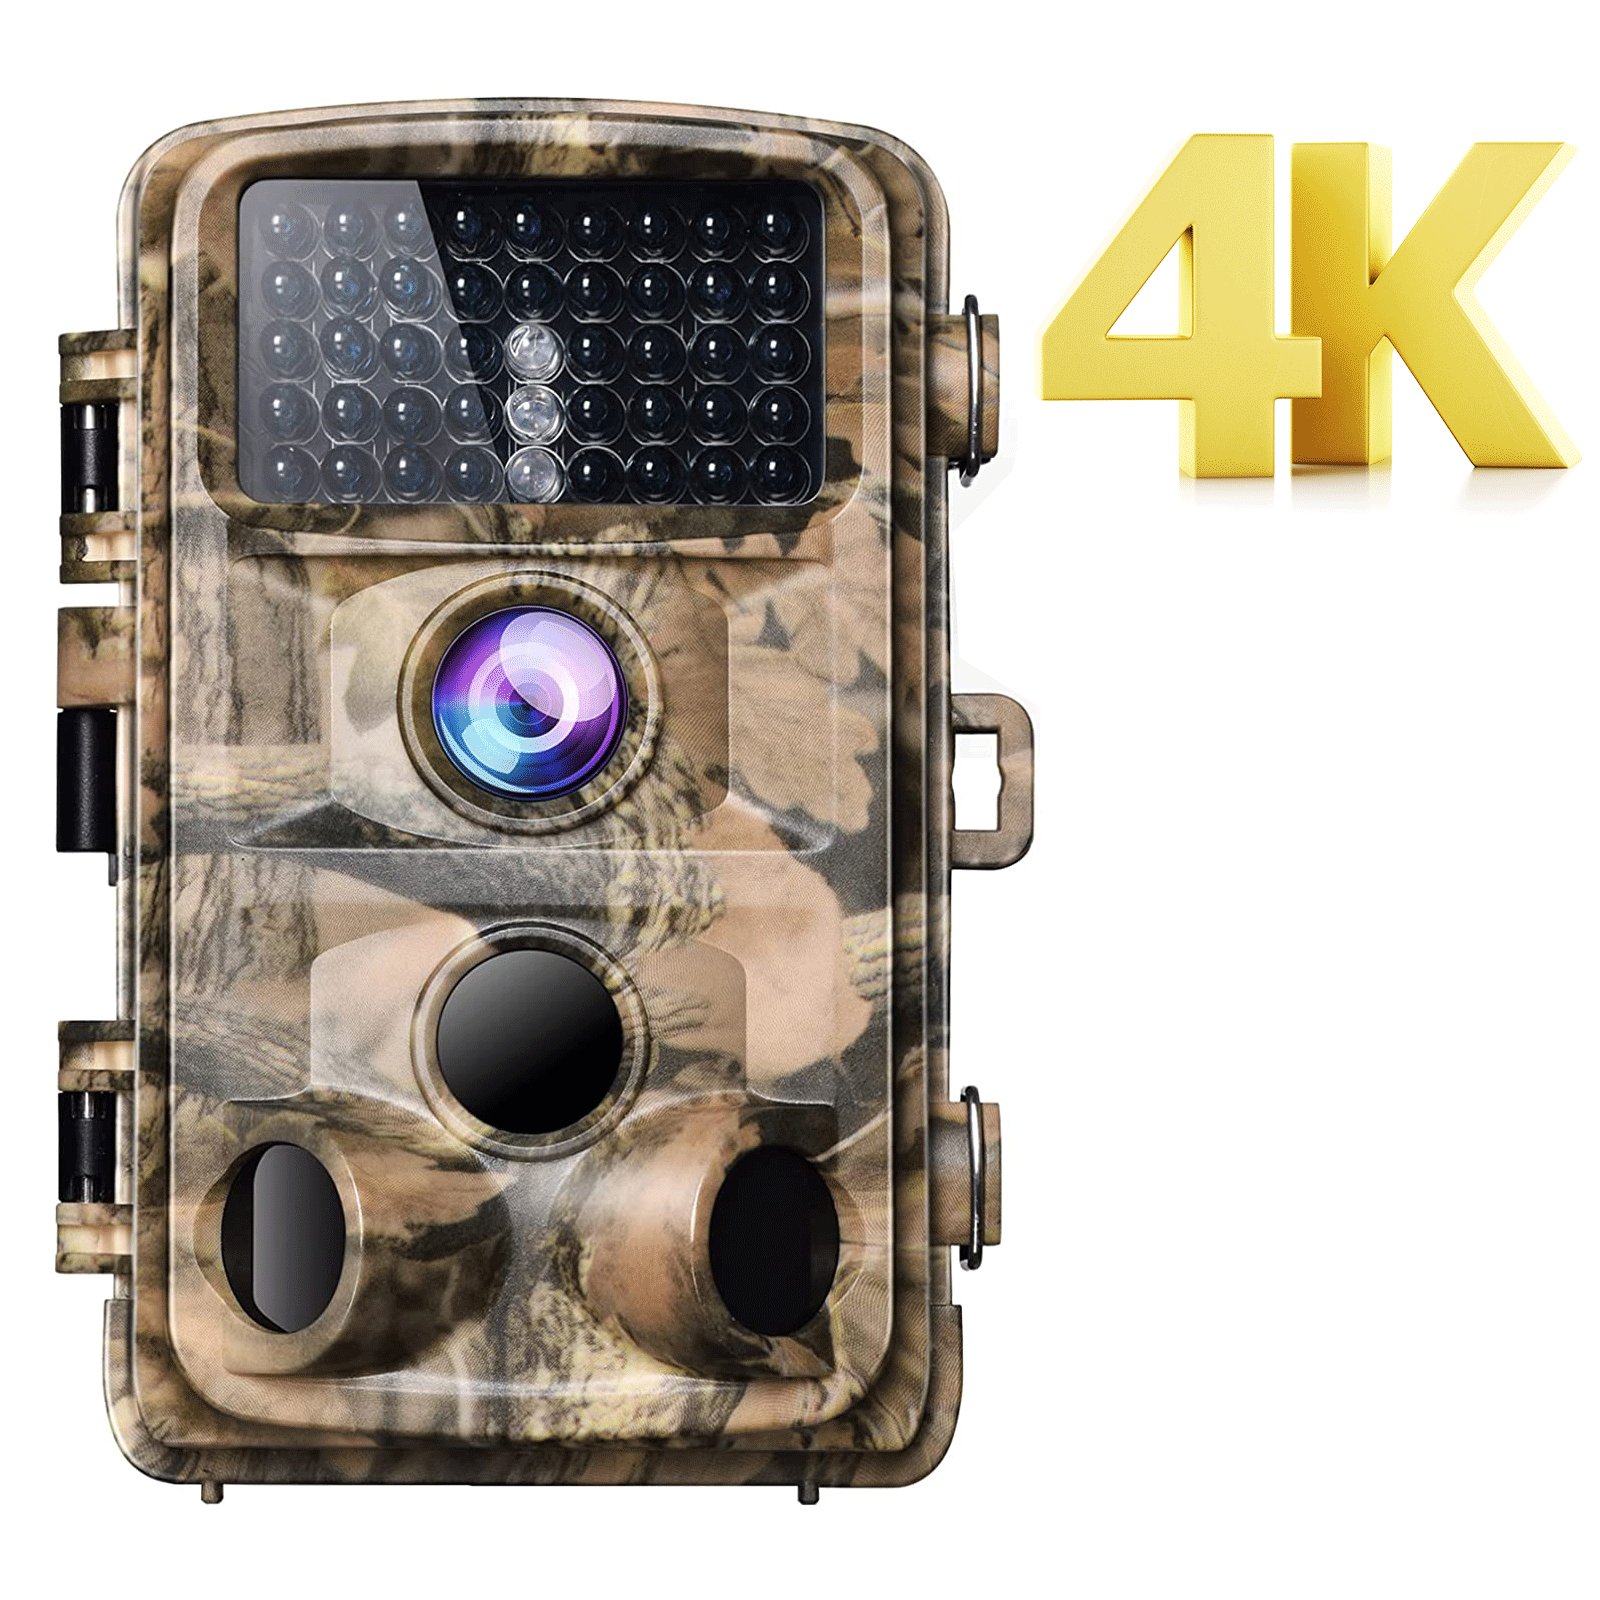 Campark T45 14MP Waterproof Hunting Infrared Game Camera for sale online 